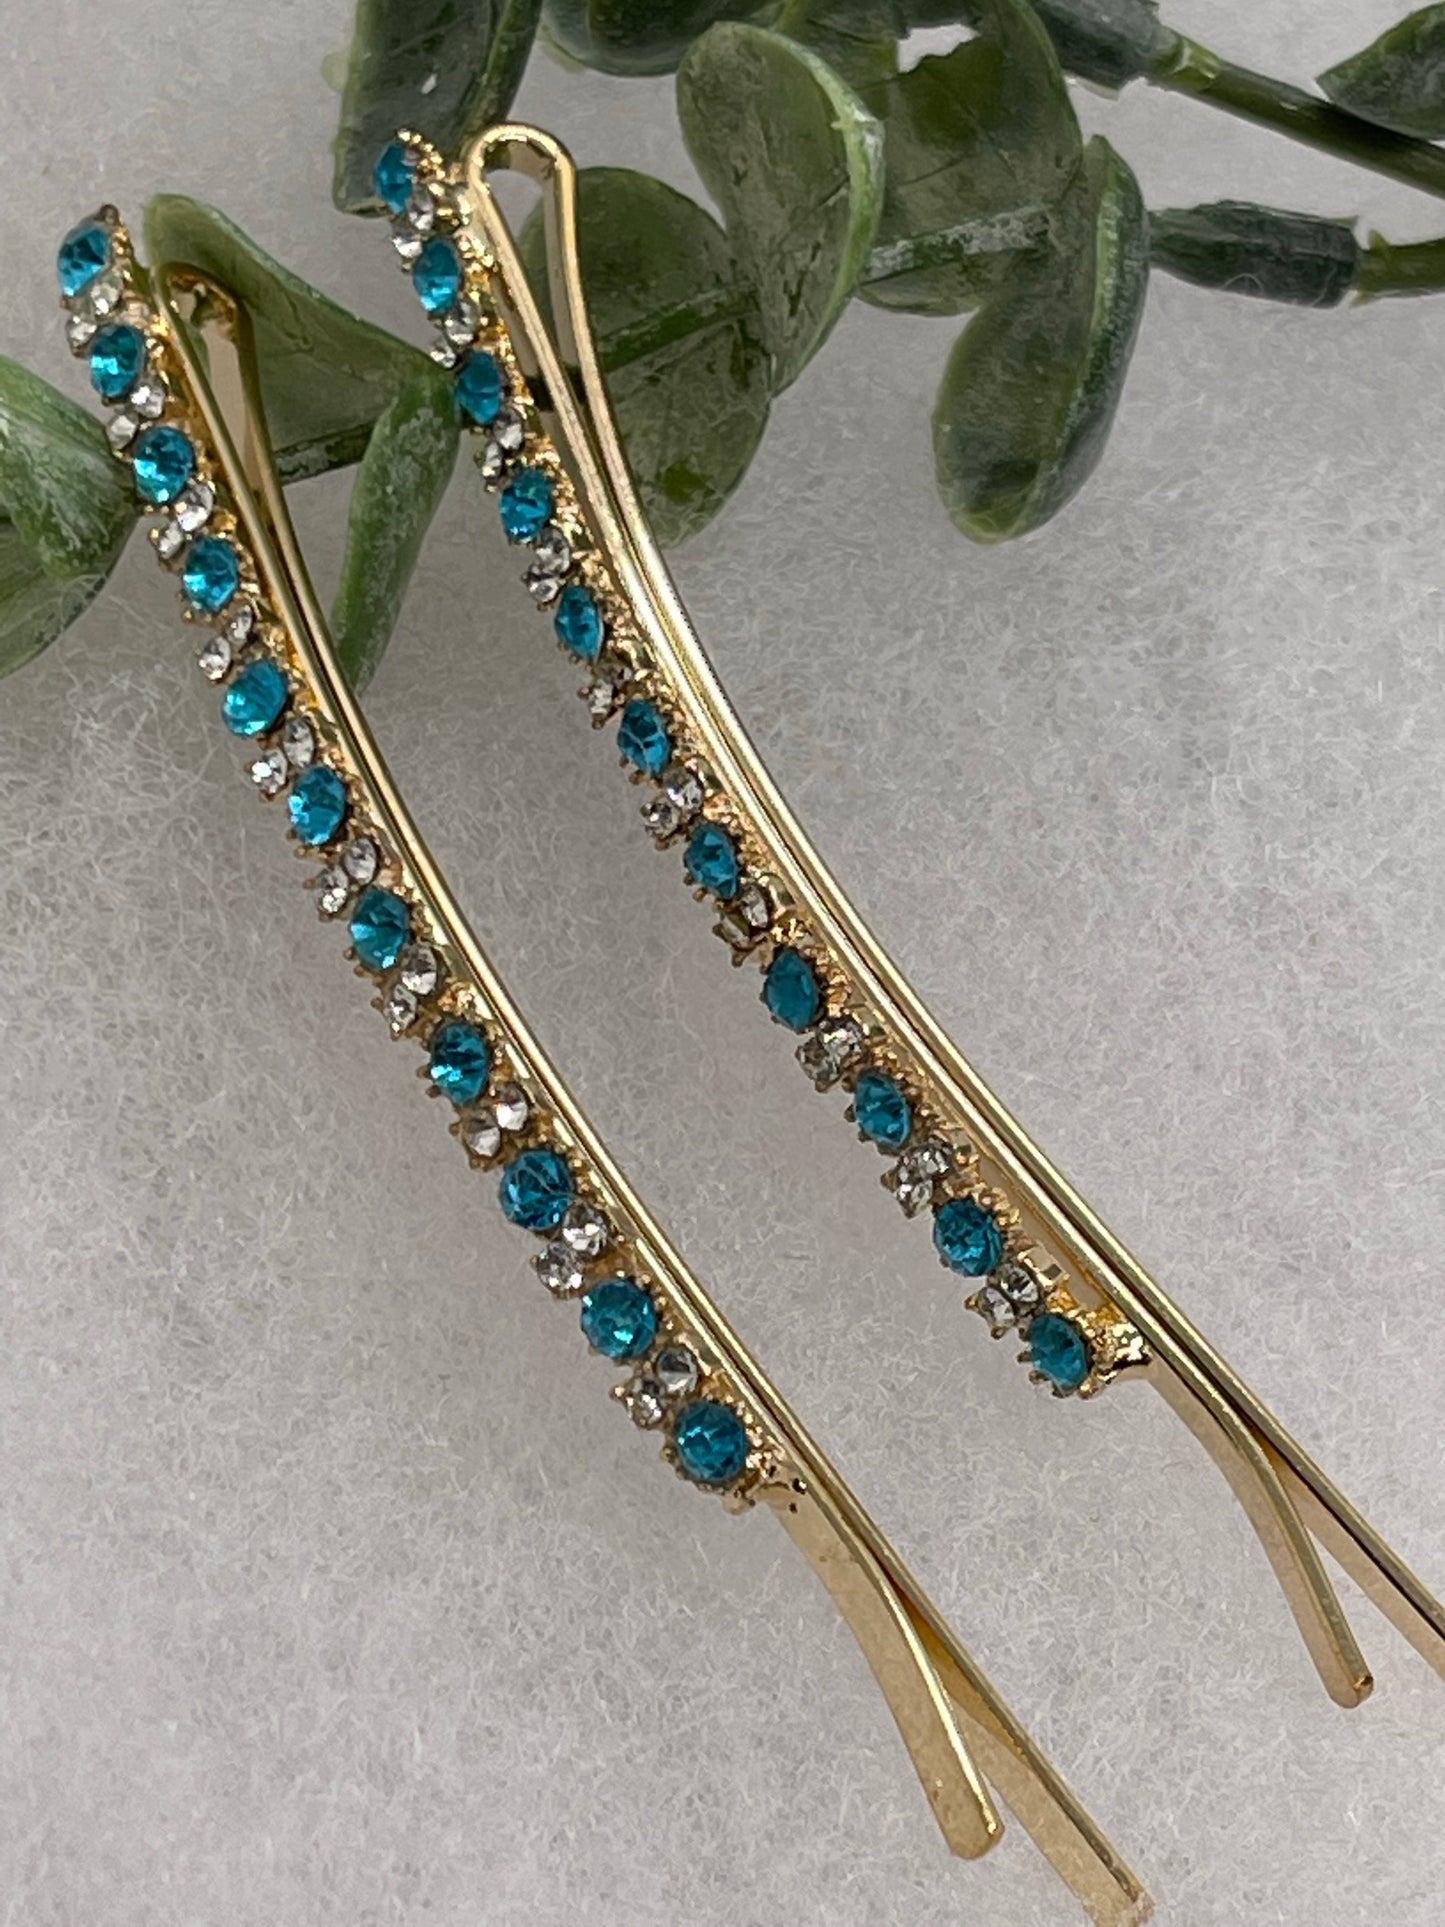 Teal crystal rhinestone approximately 3.5” large gold tone hair pins 2 pc set wedding bridal shower engagement formal princess accessory accessories